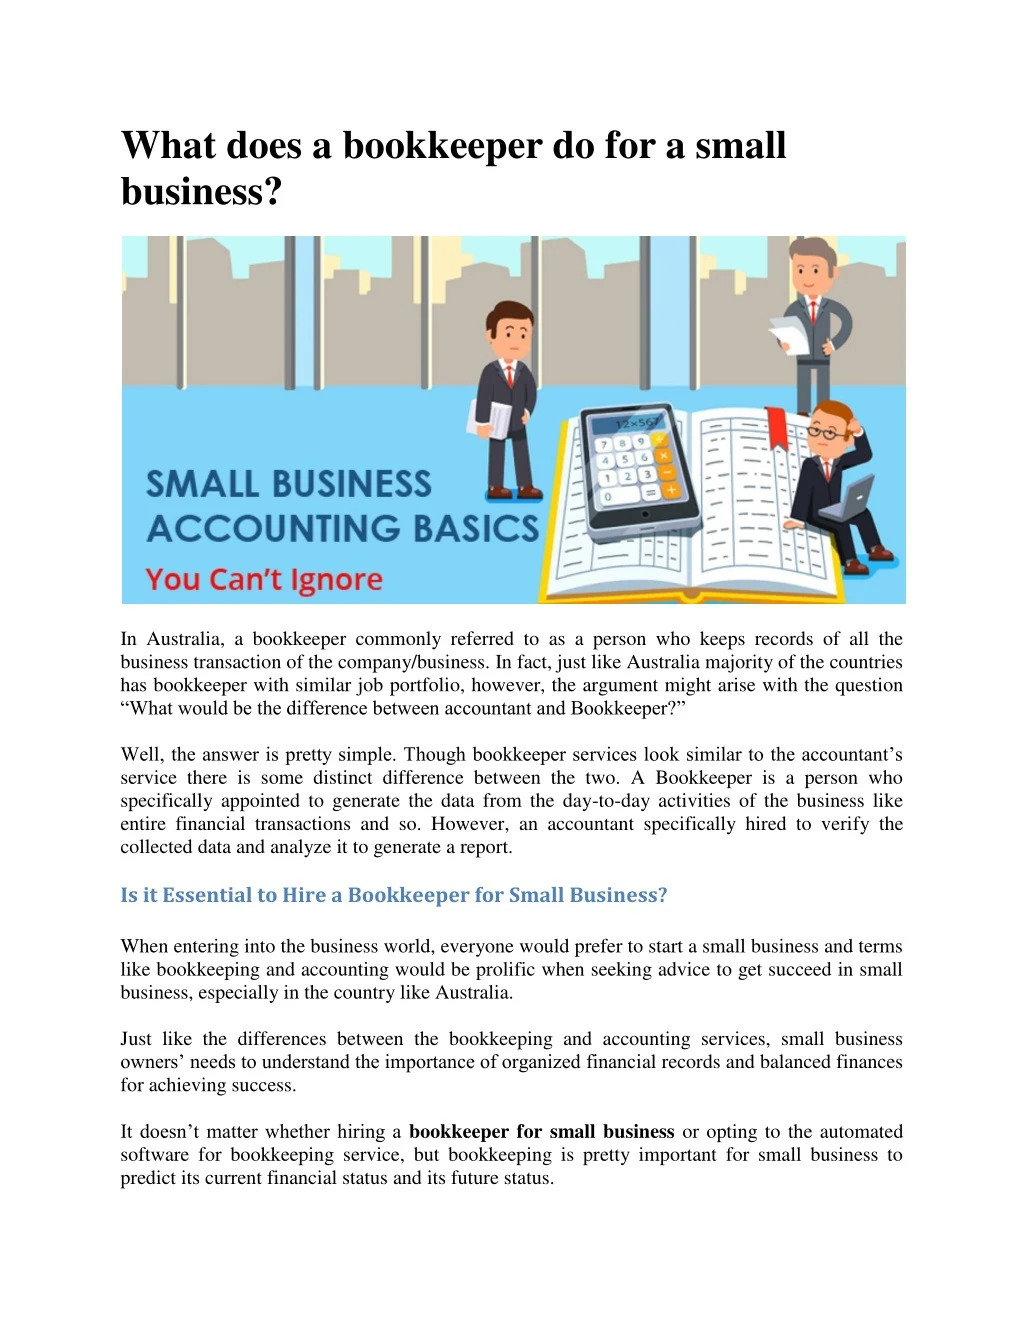 what does a bookkeeper do for a small business